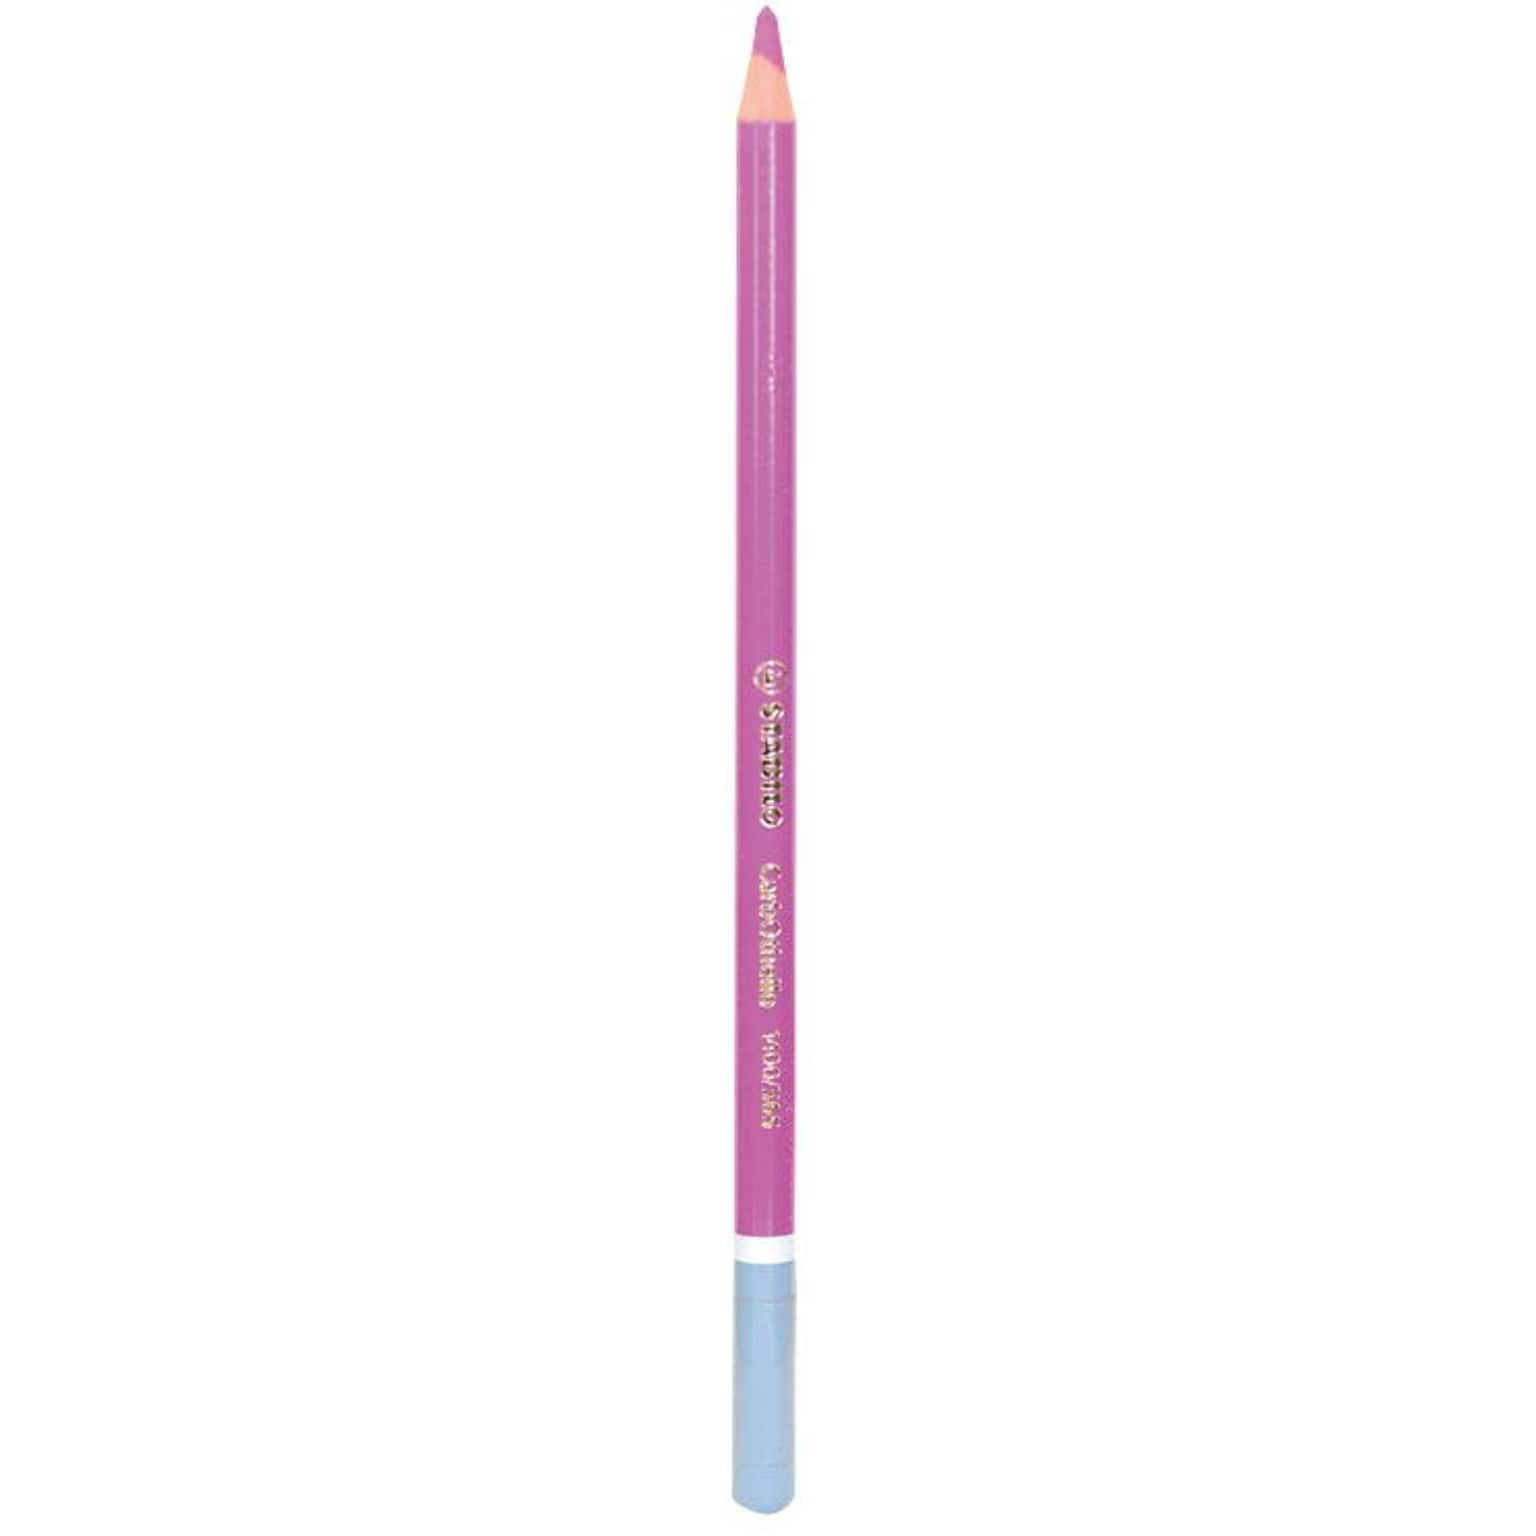 Stabilo Carb-Othello Pastel Pencils, Violet Light 365, Pack of 12